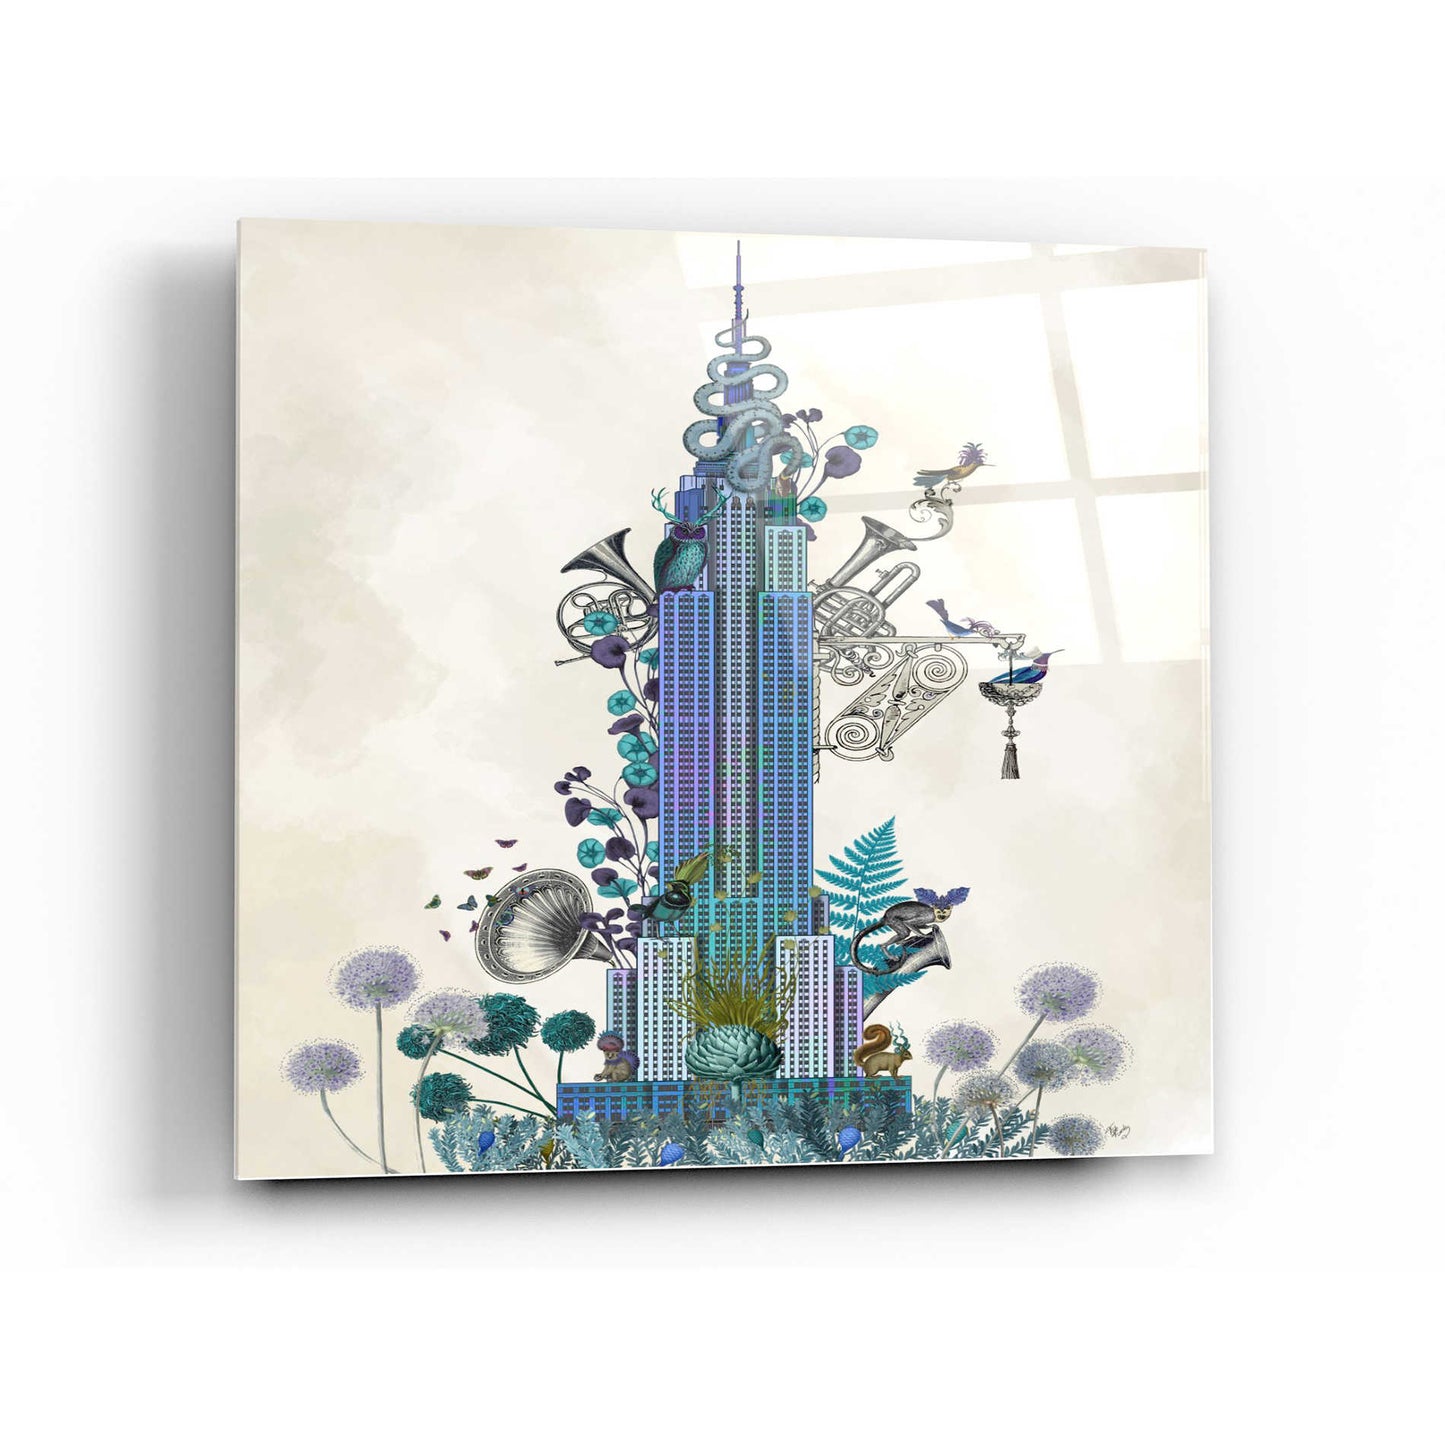 Epic Art 'New York Empire State Building, Menagerie' by Fab Funky Acrylic Glass Wall Art,12x12